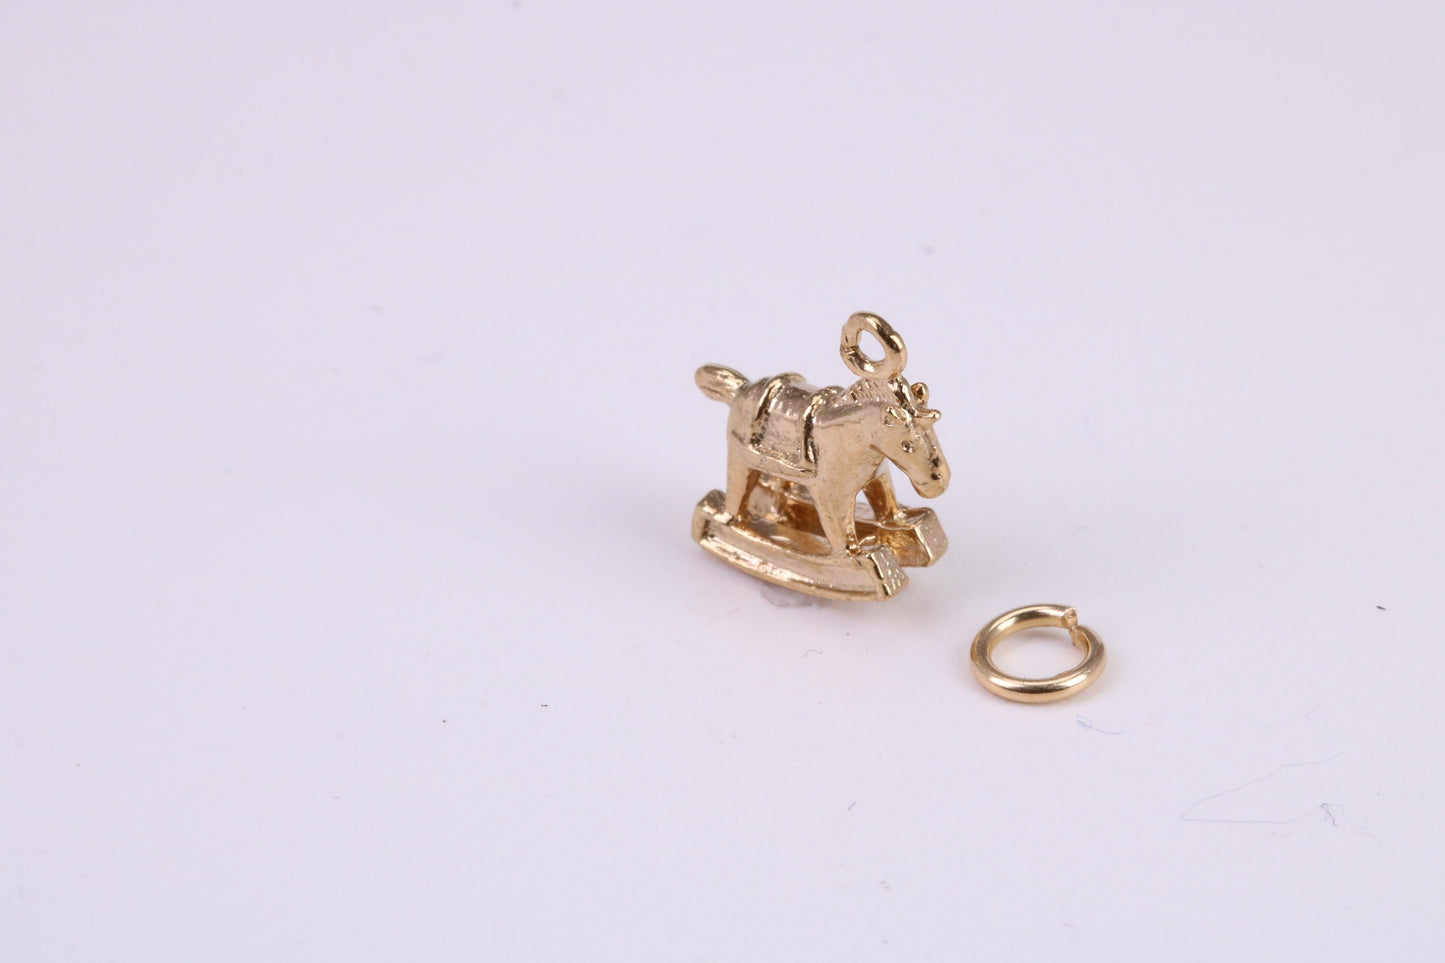 Rocking Horse Charm, Traditional Charm, Made From Solid Yellow Gold with British Hallmark, Complete with Attachment Link